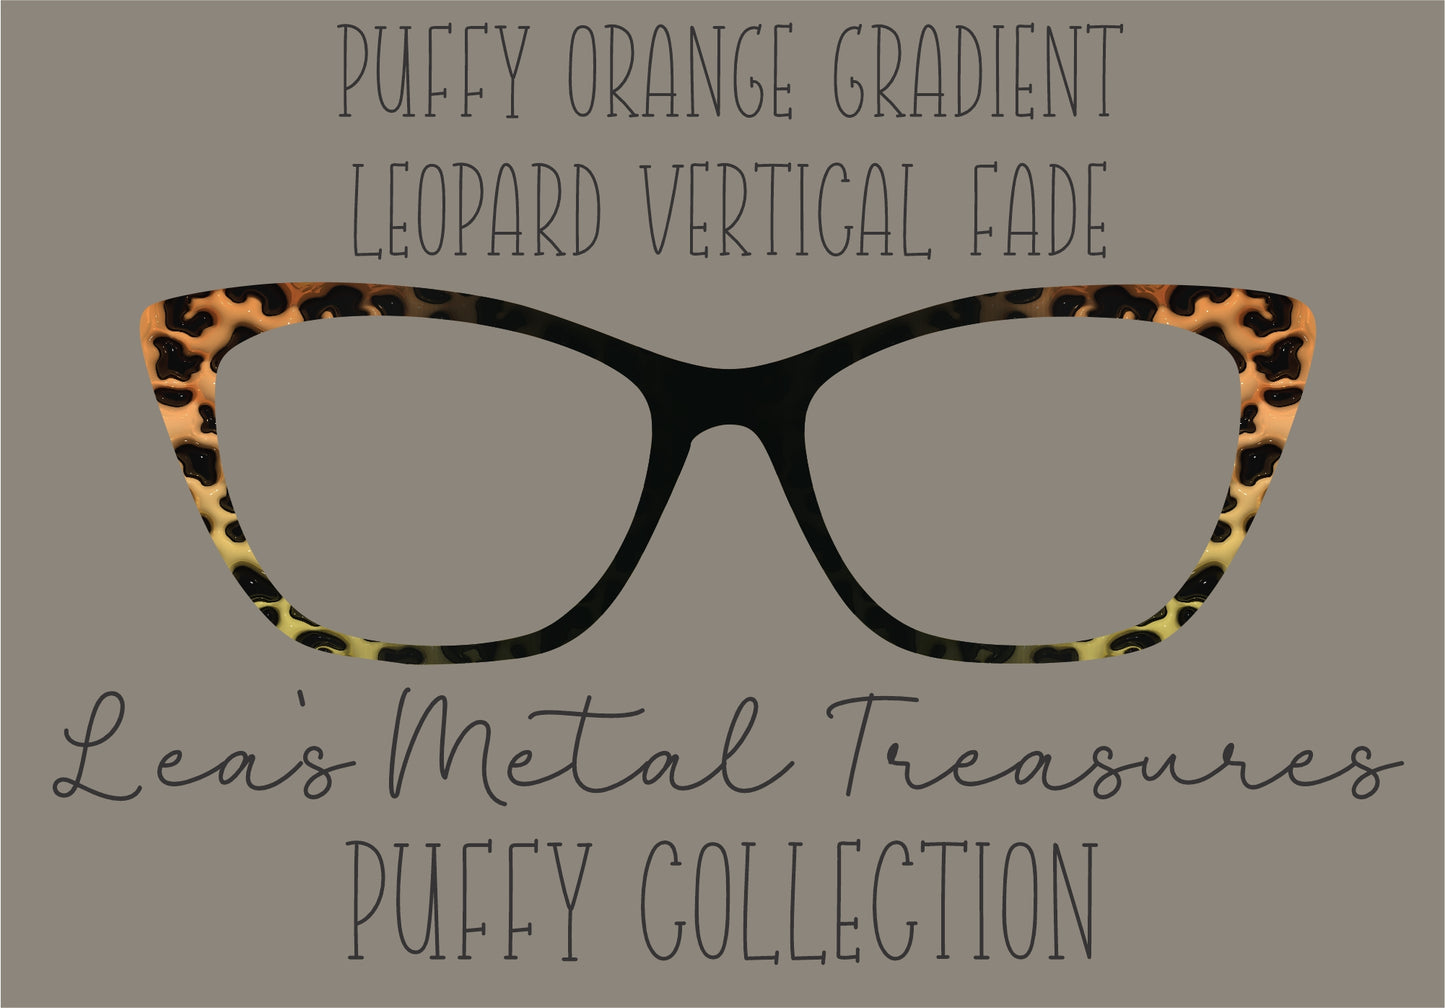 PUFFY ORANGE GRADIENT VERTICAL FADE Eyewear Frame Toppers COMES WITH MAGNETS